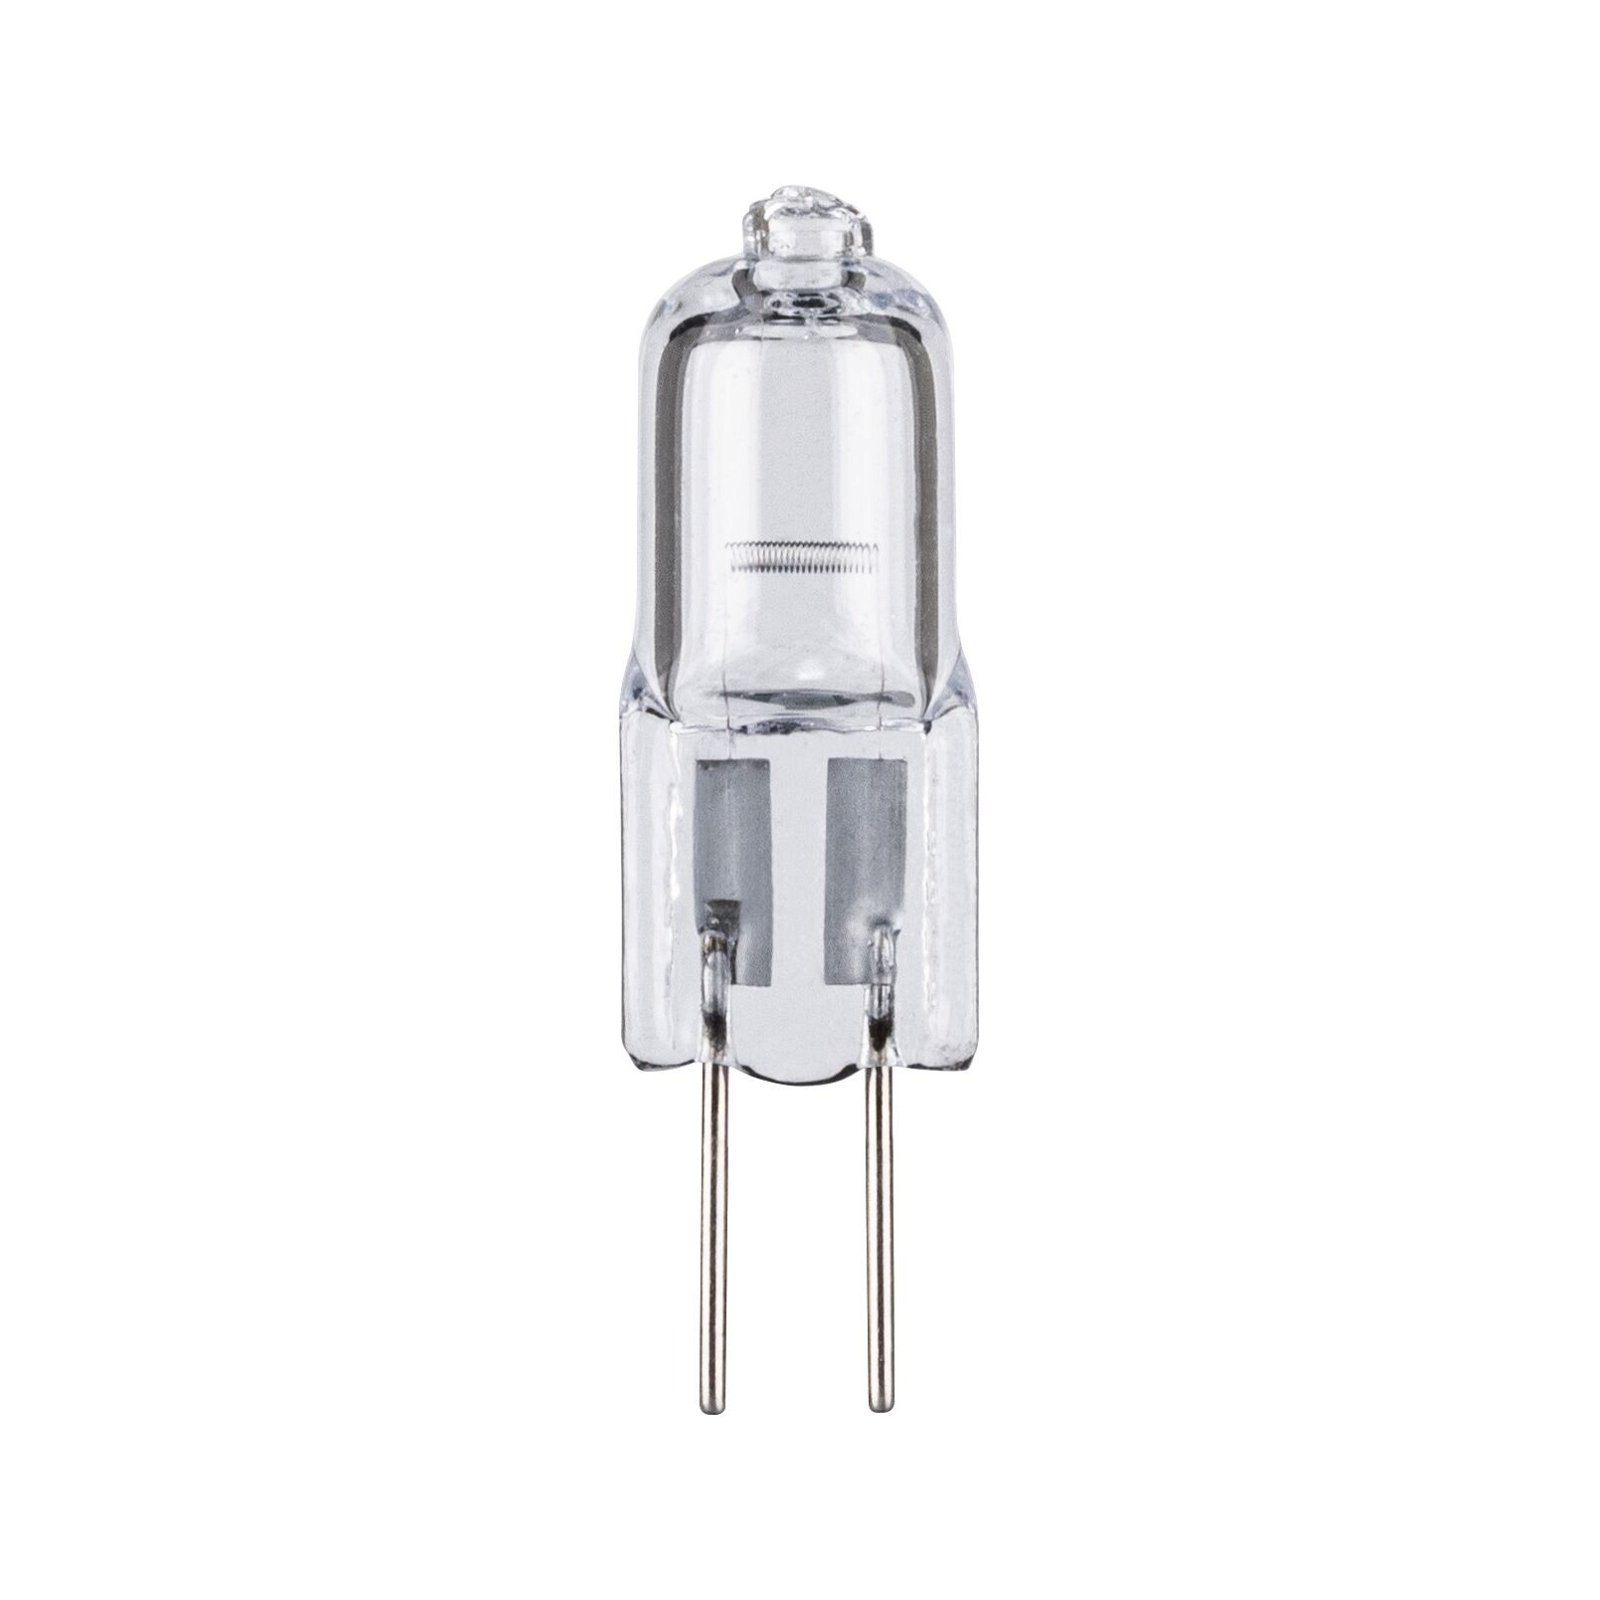 Halogen pin base Oven G4 12V 320lm 20W 2700K dimmable Clear